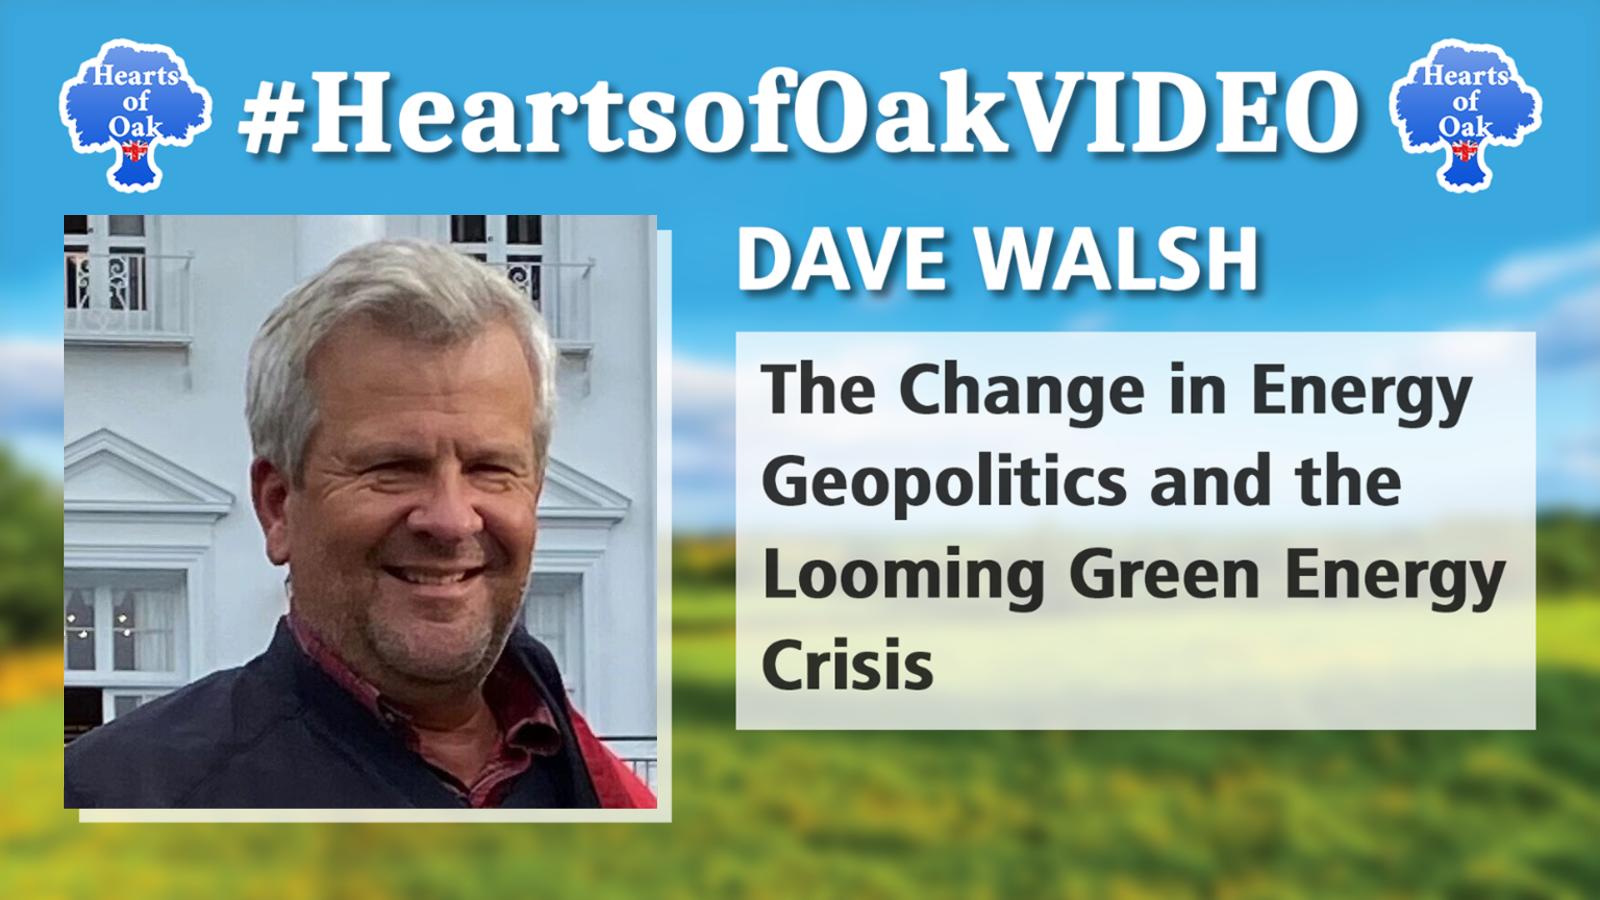 Dave Walsh - The Change in Energy Geopolitics and the Looming Green Energy Crisis